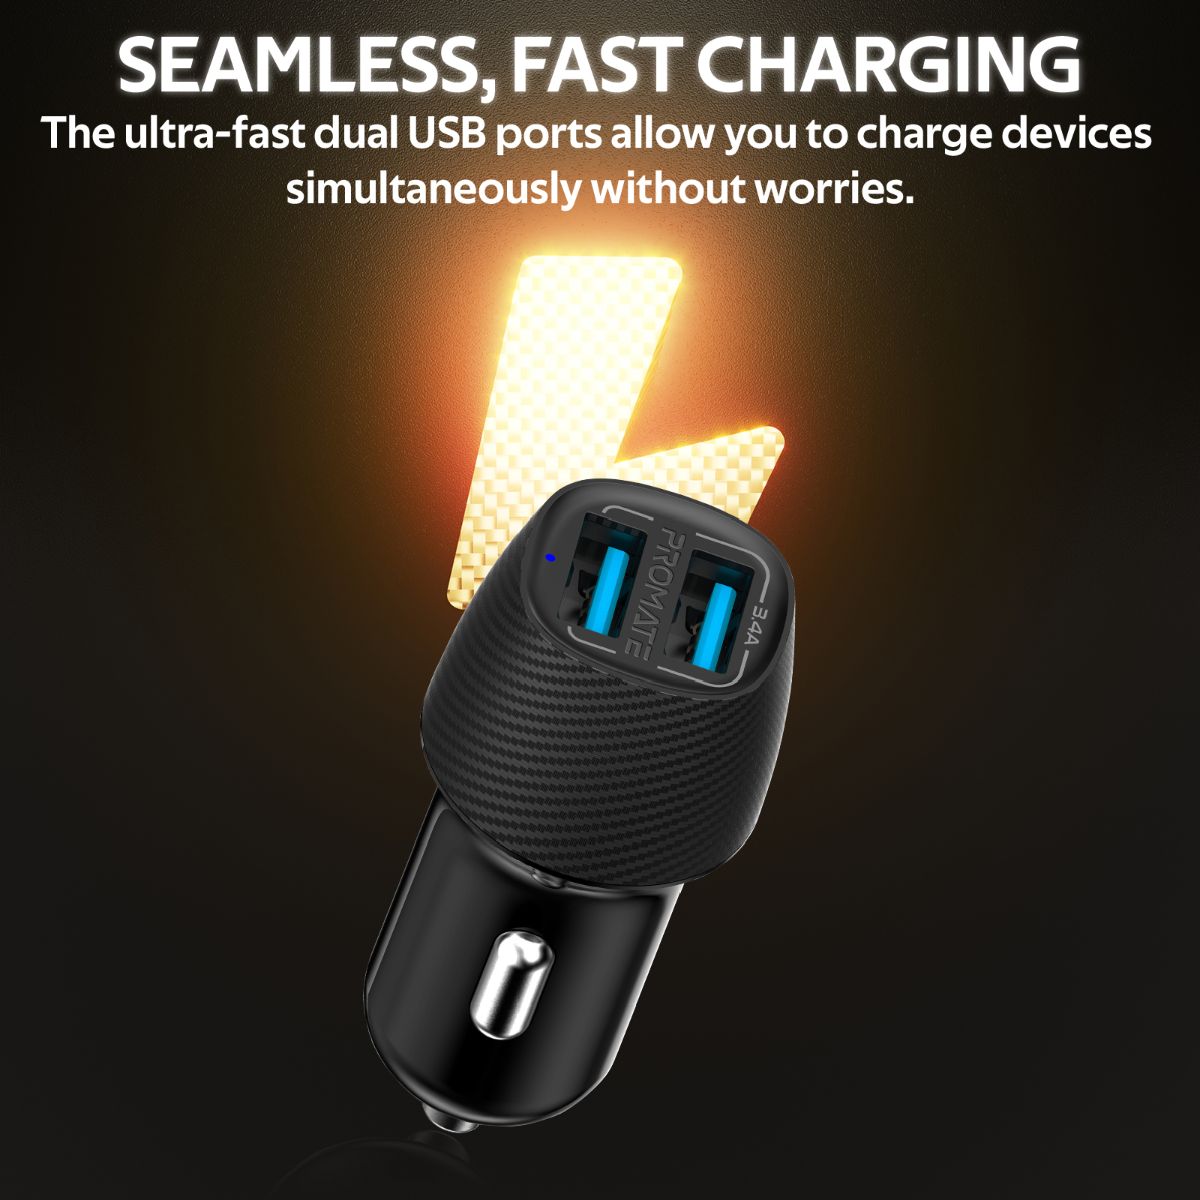 Promate - 3.4A Car Charger, Universal Compact 3.4A Fast Charging Car Adapter with Smart Output Compatible and Short Circuit Protection for Smartphones, Tablet, All USB Enabled Devices, VolTrip-Duo Black